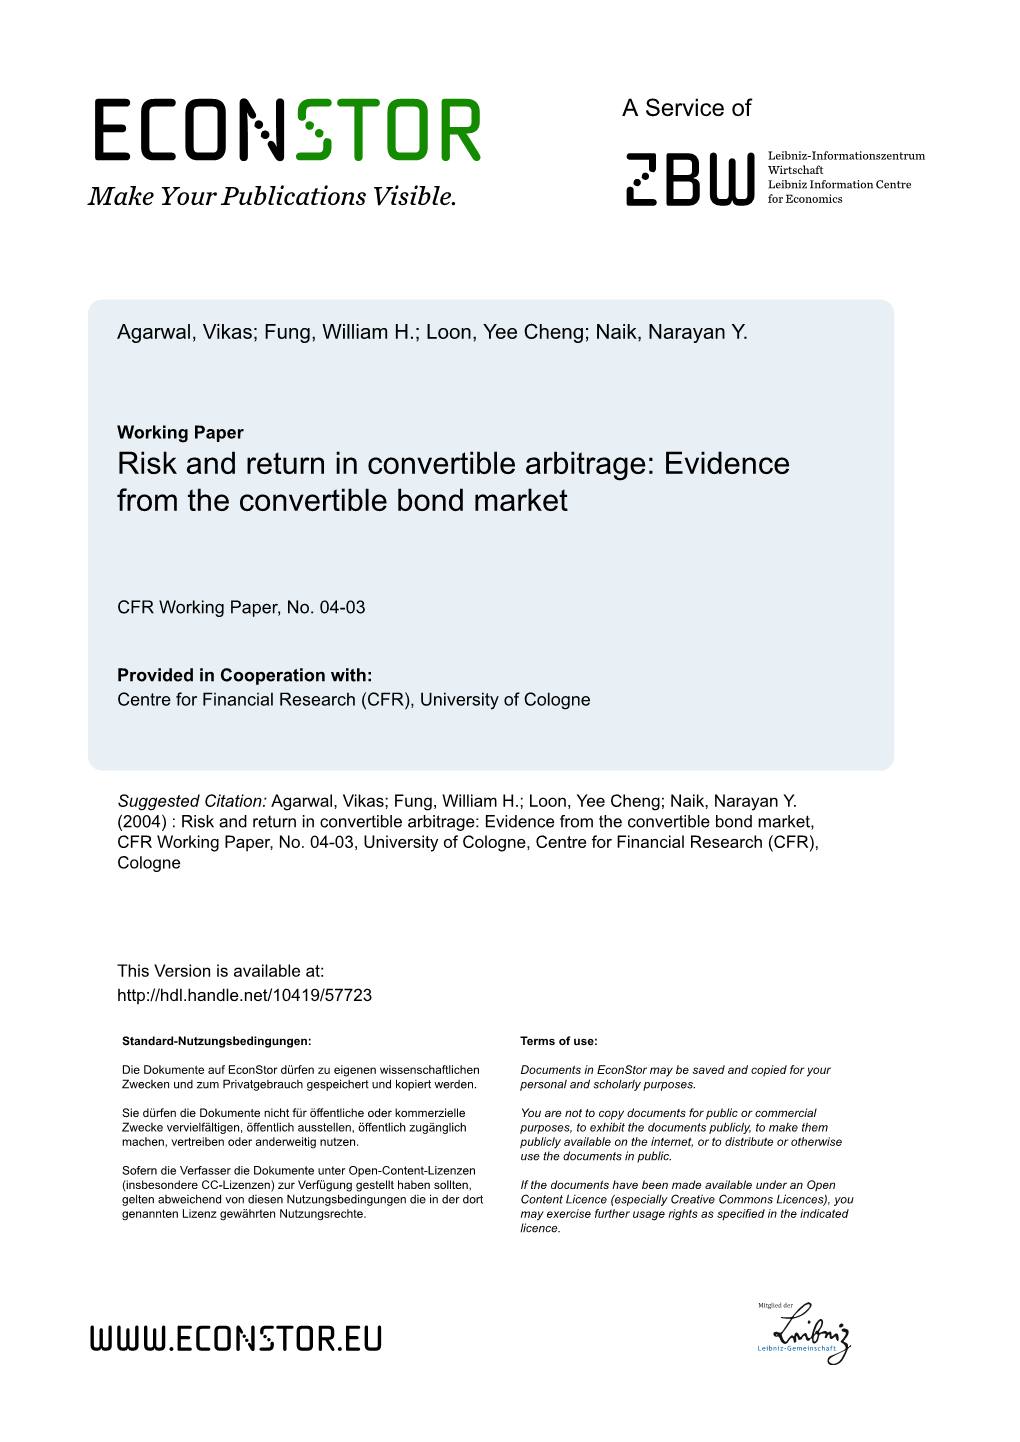 Risk and Return in Convertible Arbitrage: Evidence from the Convertible Bond Market